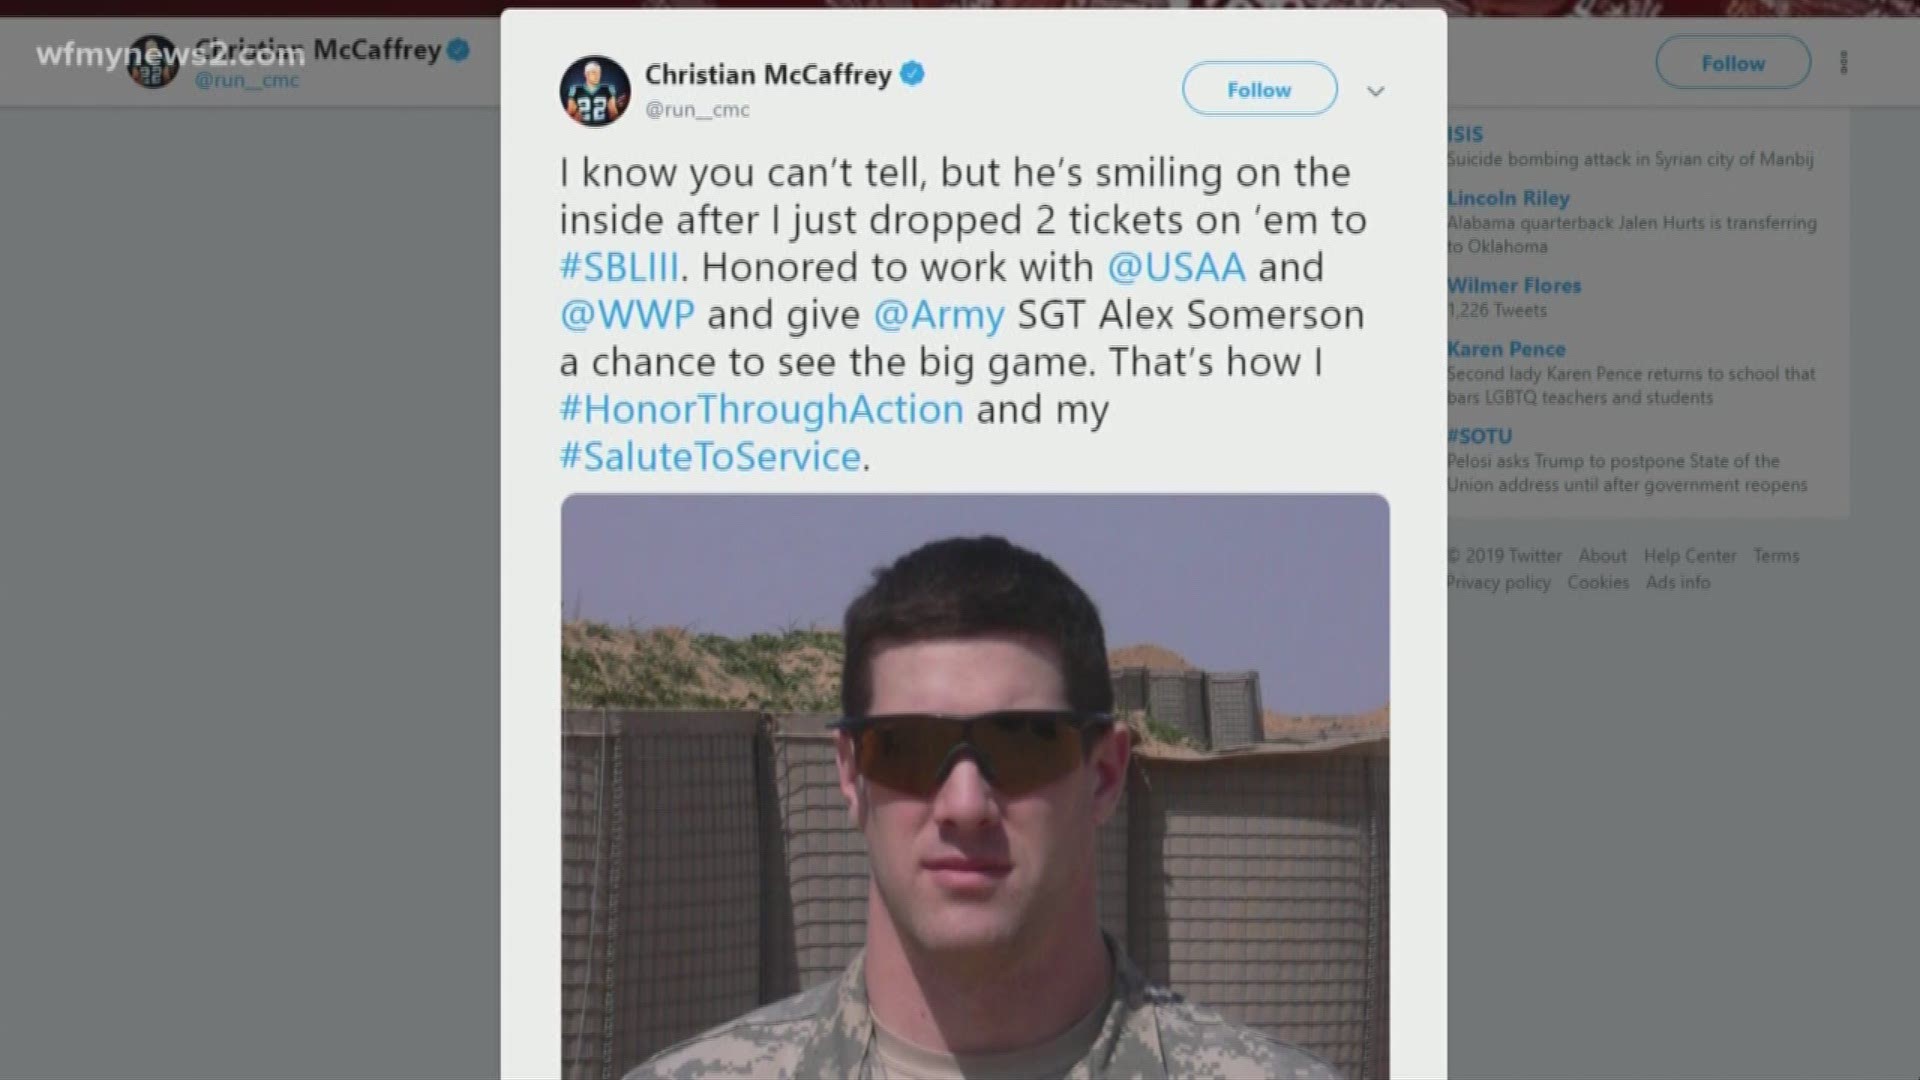 McCaffrey might not play in the super bowl this year, but thanks to him, two lucky veterans will get to watch the game in person.